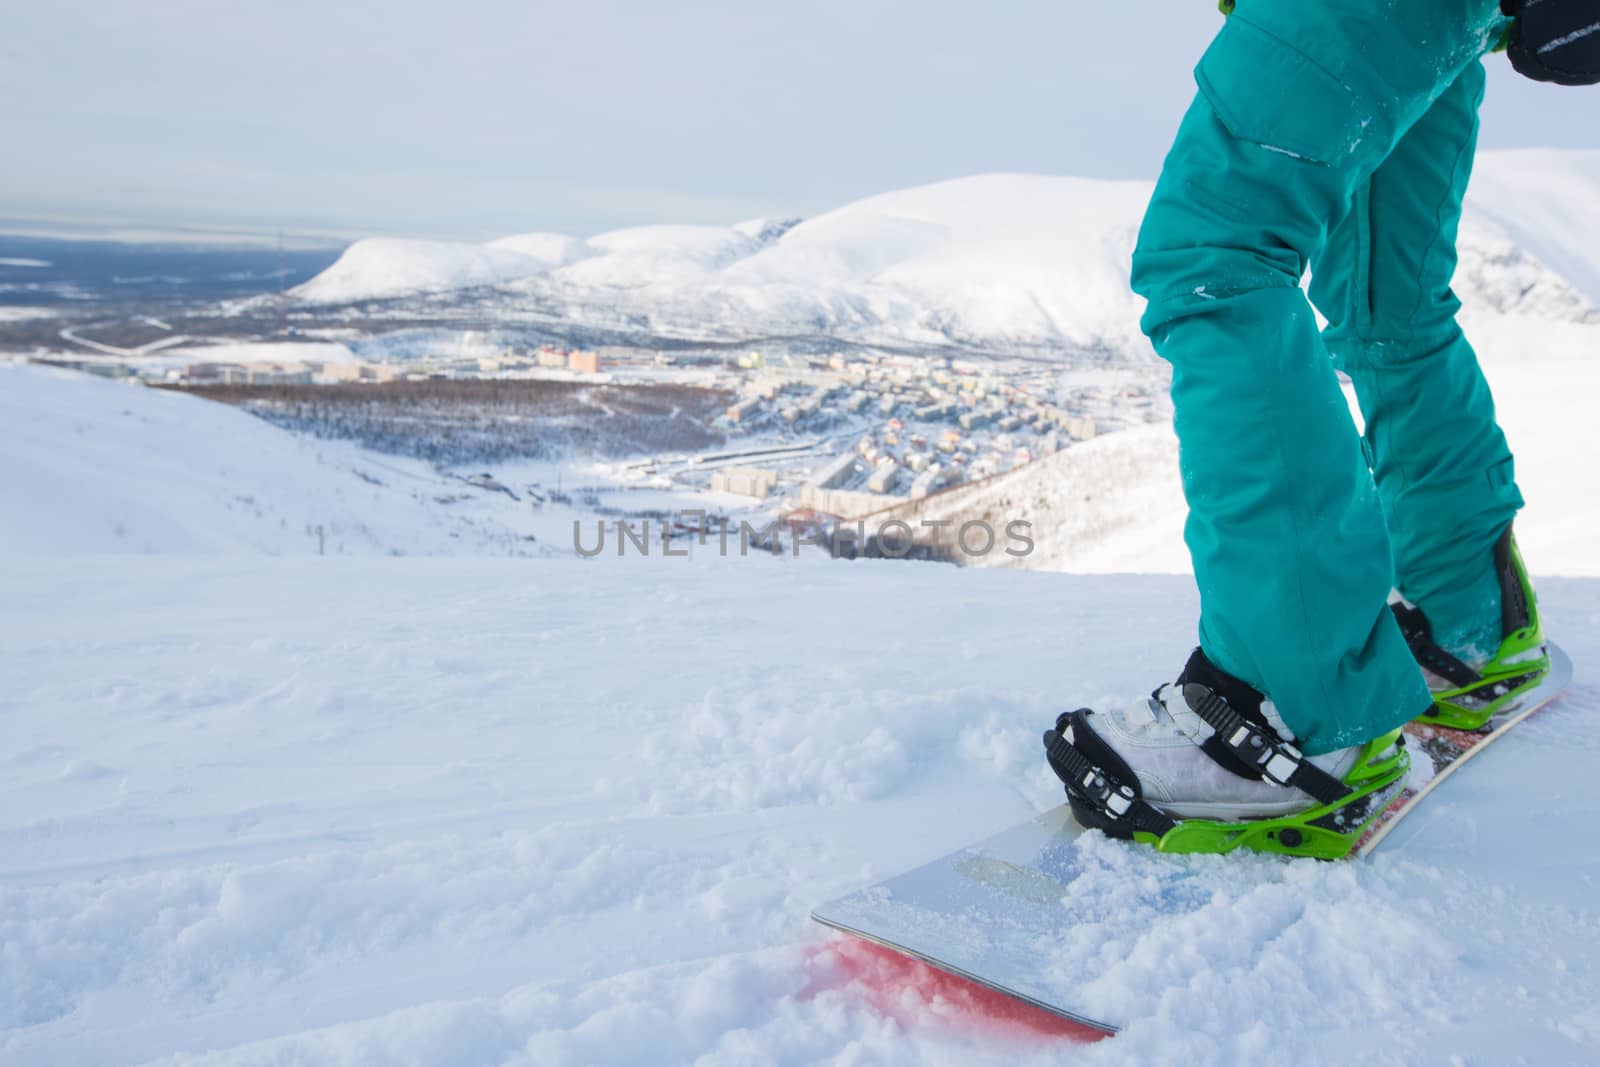 Kirovsk, Russia - Snowboarder on piste in high mountains on ski slope. Rear view. Winter snowboard and skiing concept. Khibiny Mountains, Kola Peninsula panoramic view in town